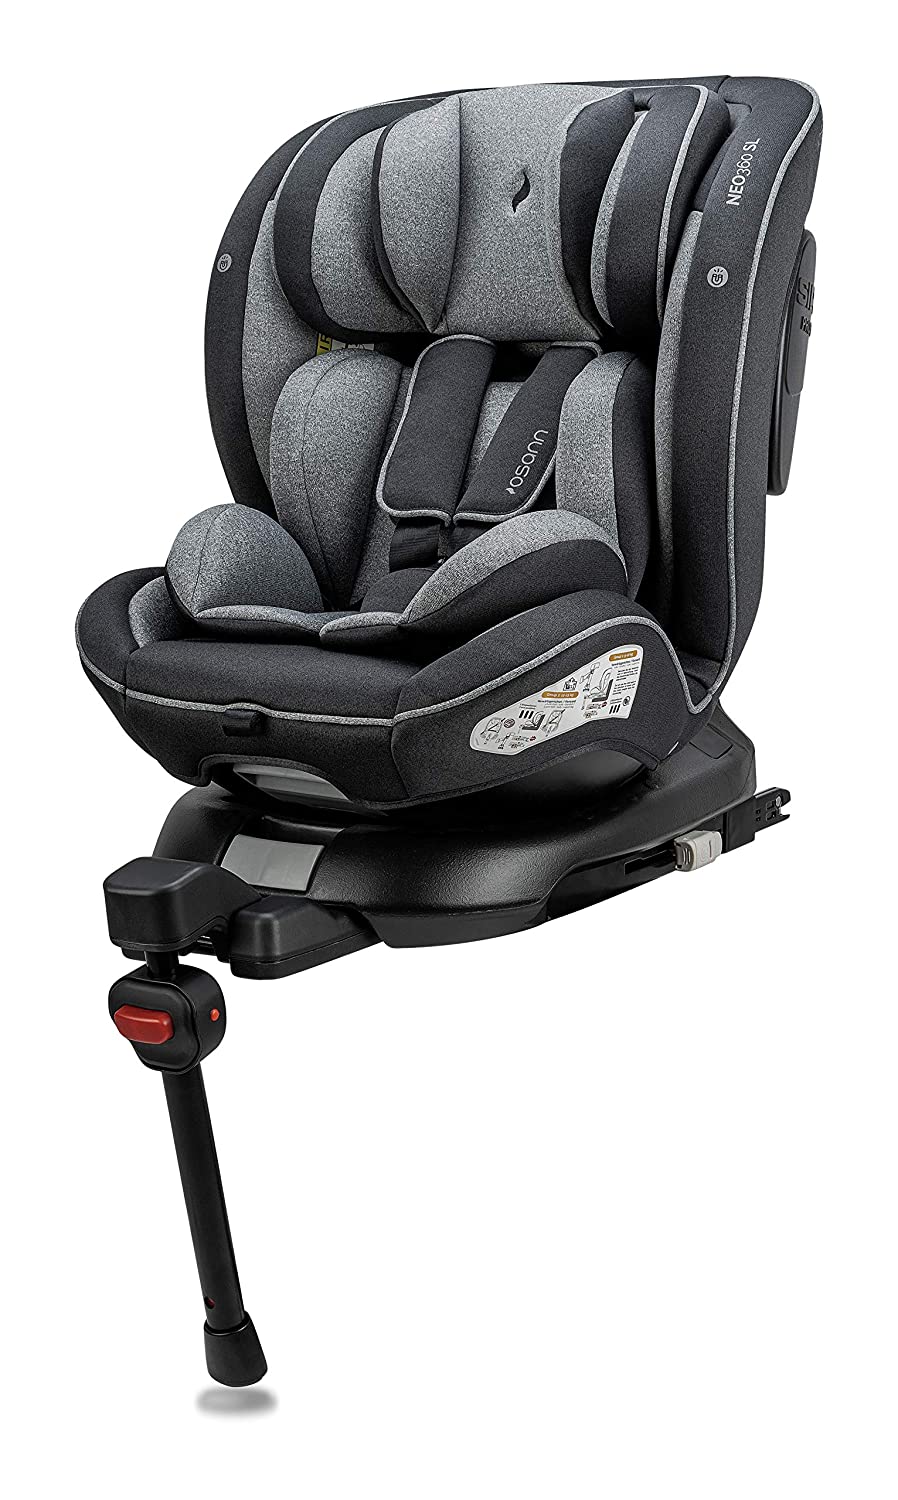 Osann Neo360 SL Child Seat Group 0+/1/2 (0-25 kg), Reboarder Child Seat with Isofix and Stand